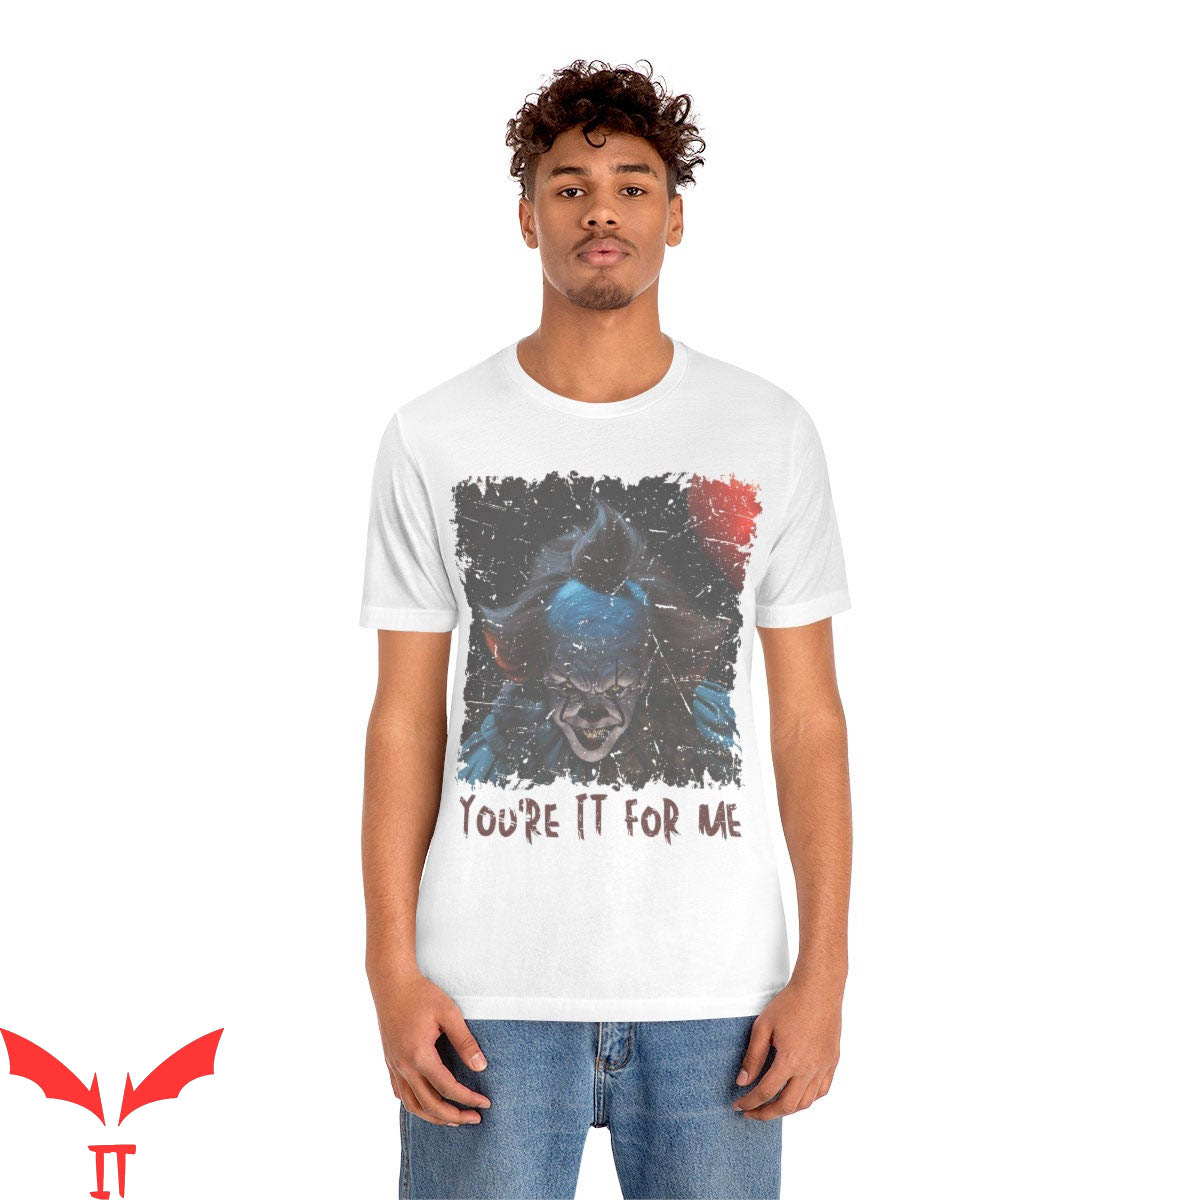 IT Pennywise T-Shirt You're IT For Me Scary Laughing Face